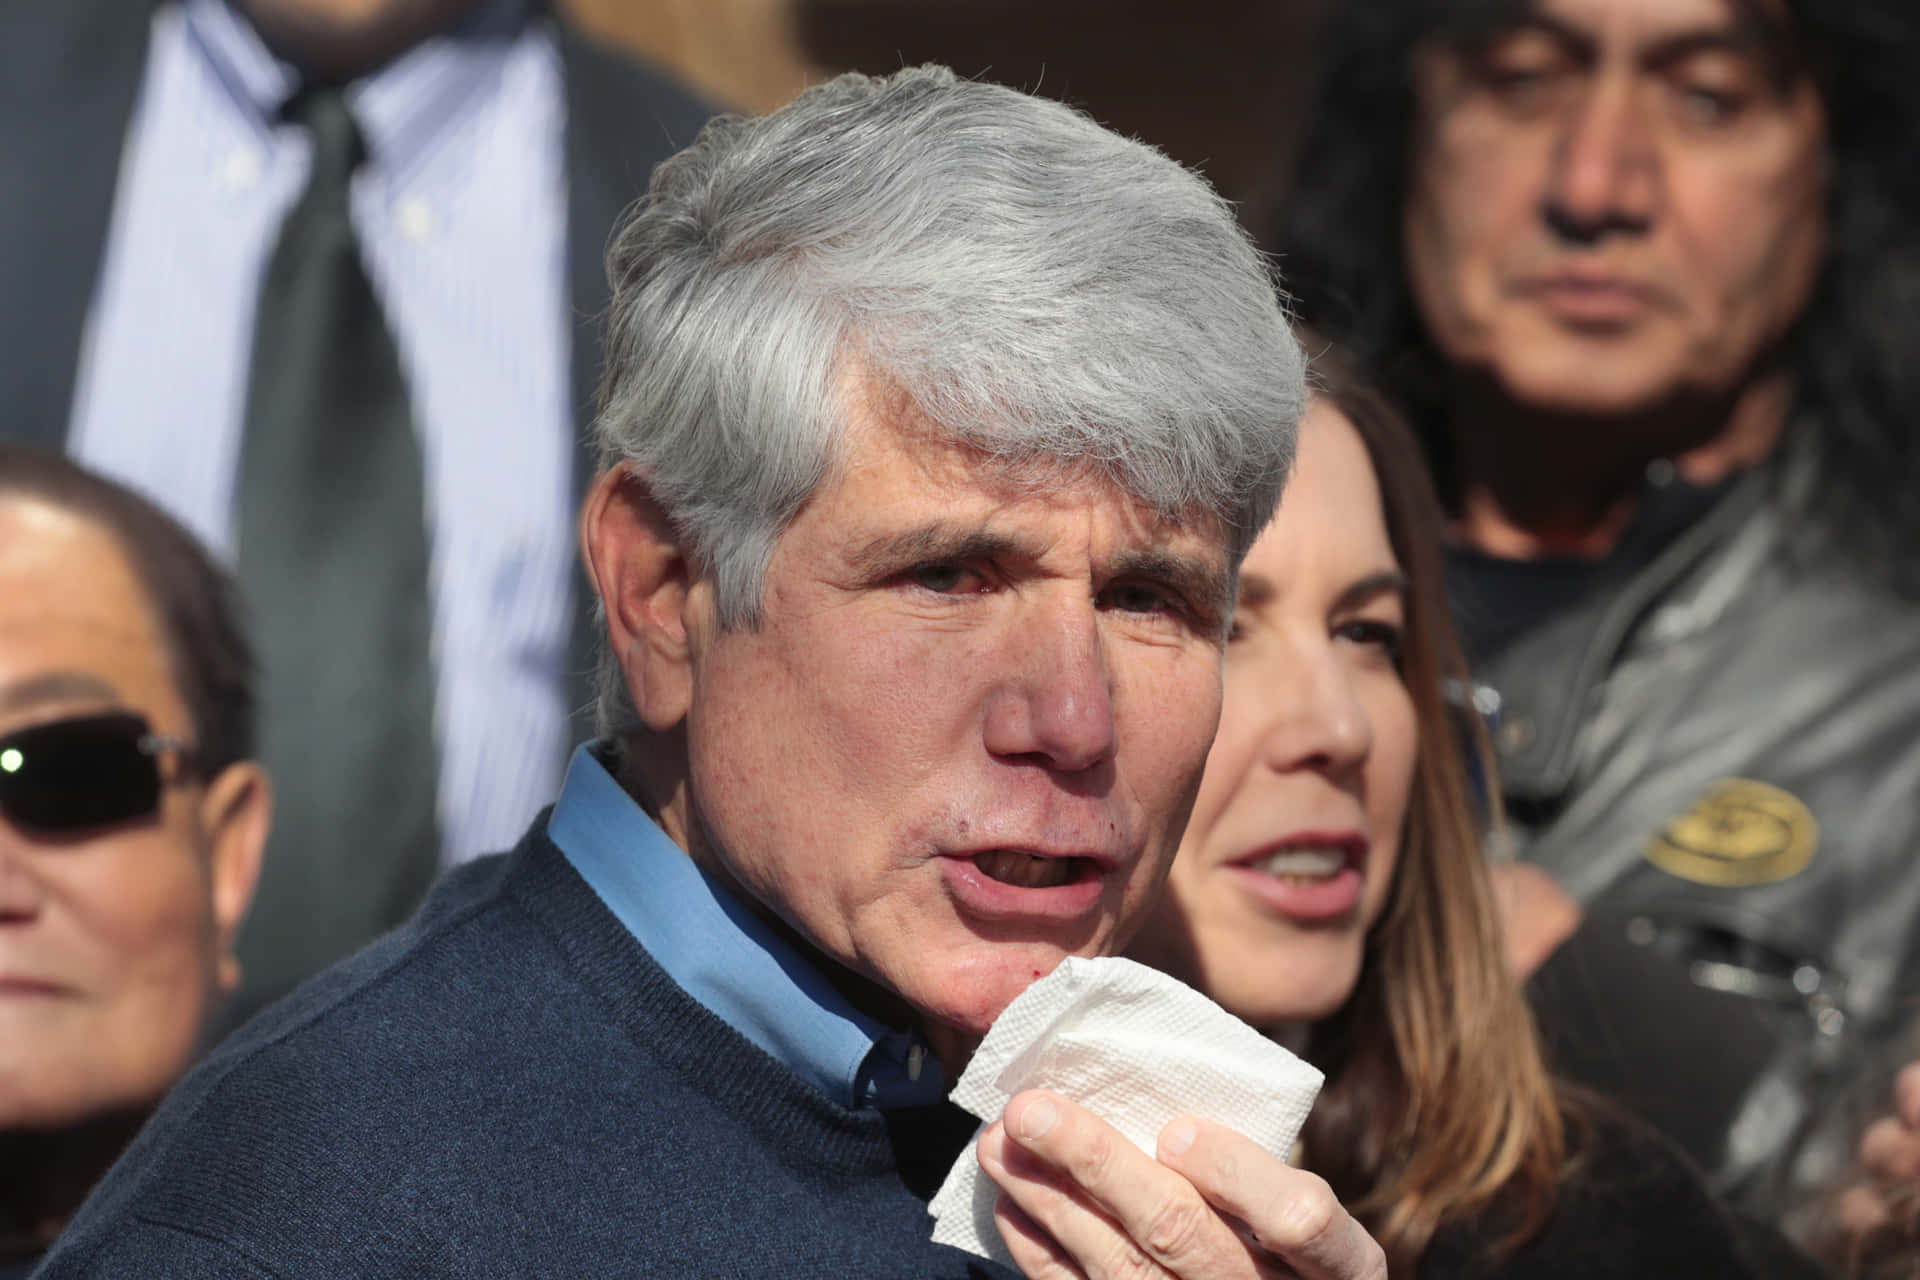 Former Illinois Governor Rod Blagojevich in thoughtful moment Wallpaper